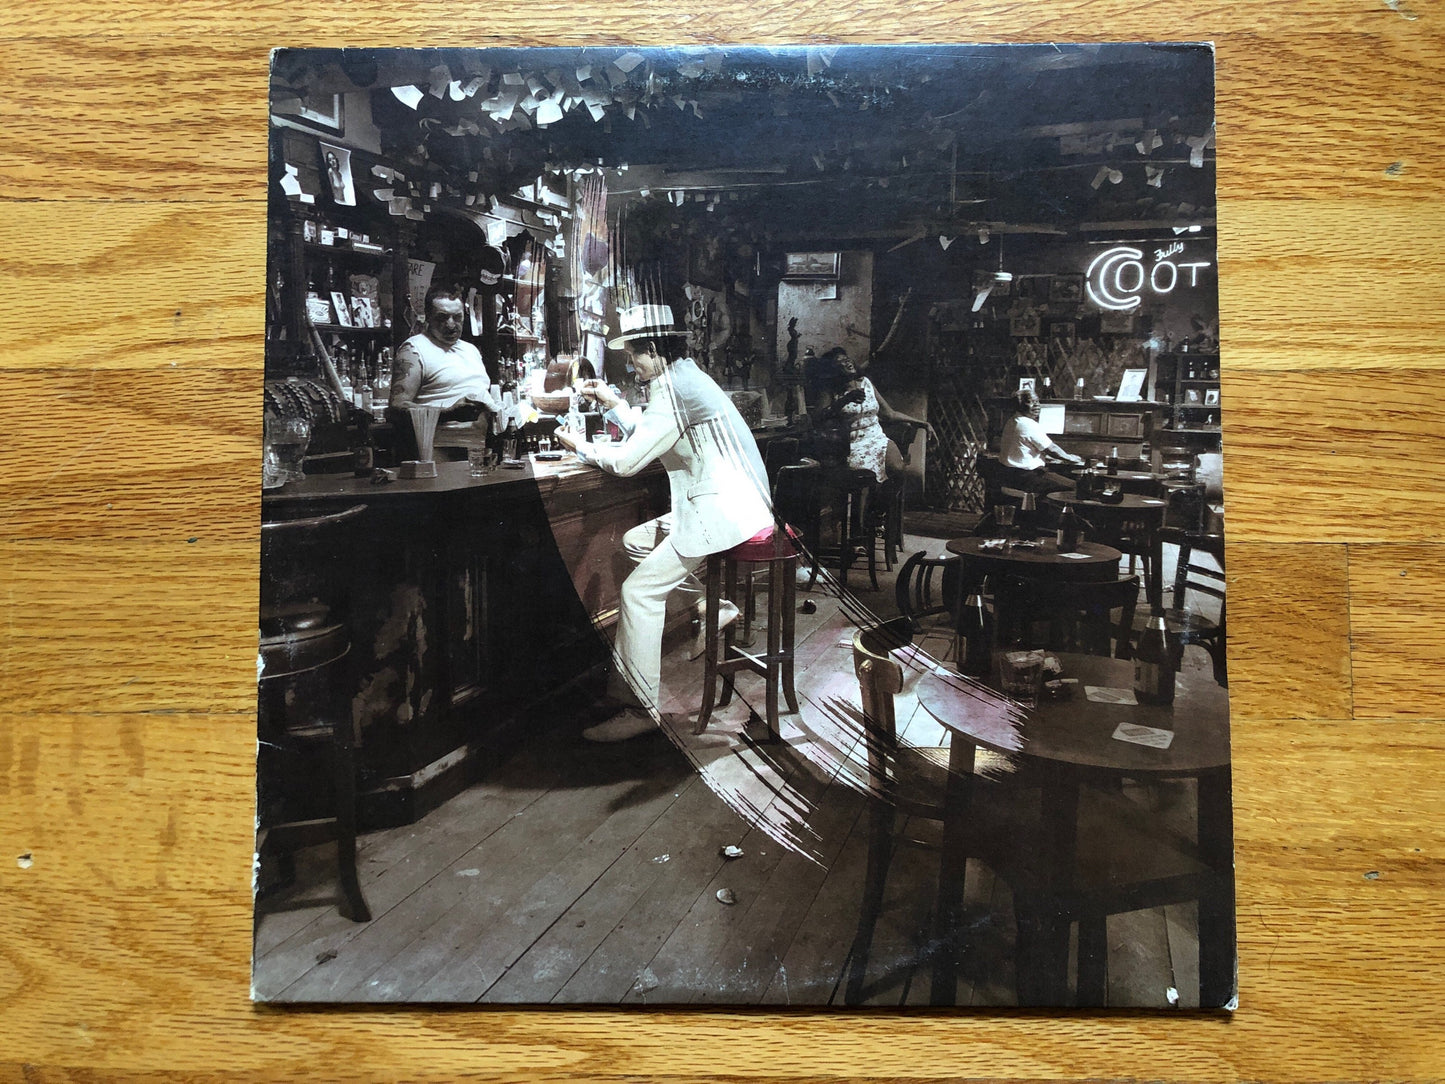 Led Zeppelin In Through The Out Door, Cover A, Presswell Pressing SS16002, Vintage vinyl record LP, 1970's Led Zeppelin Records